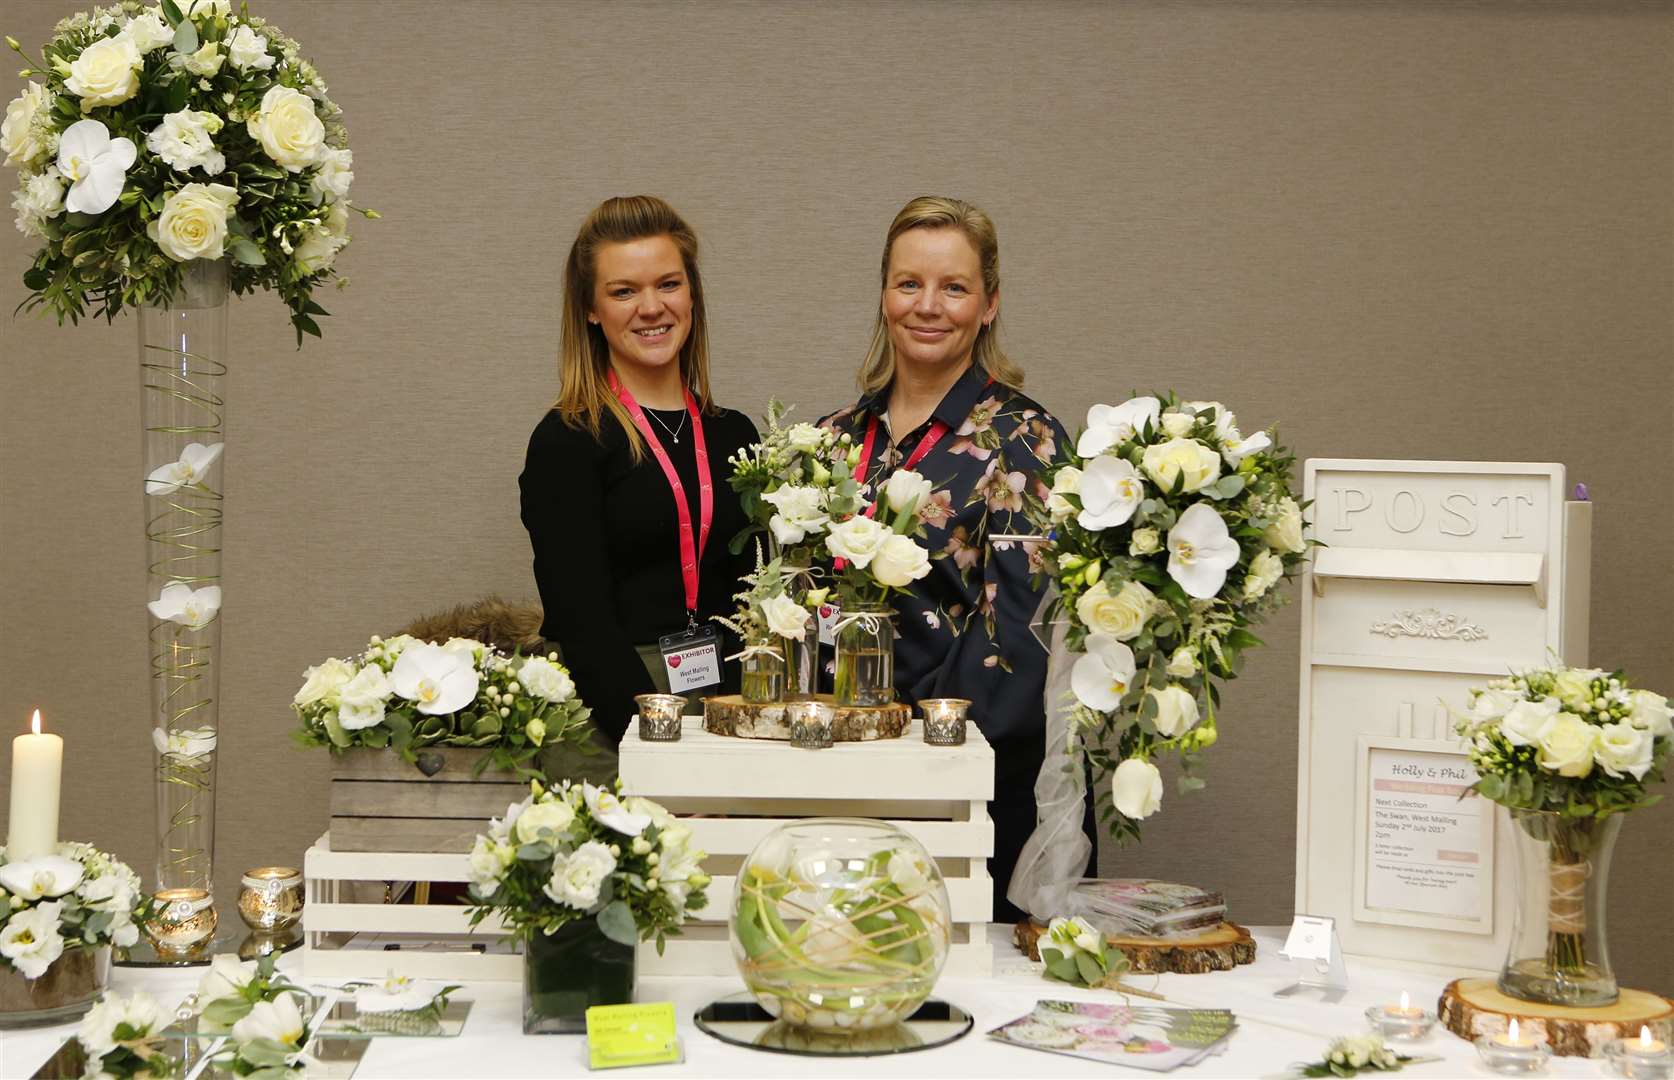 Sian Johnson and Nikki Meader from West Malling Flowers at the Wedding Experience